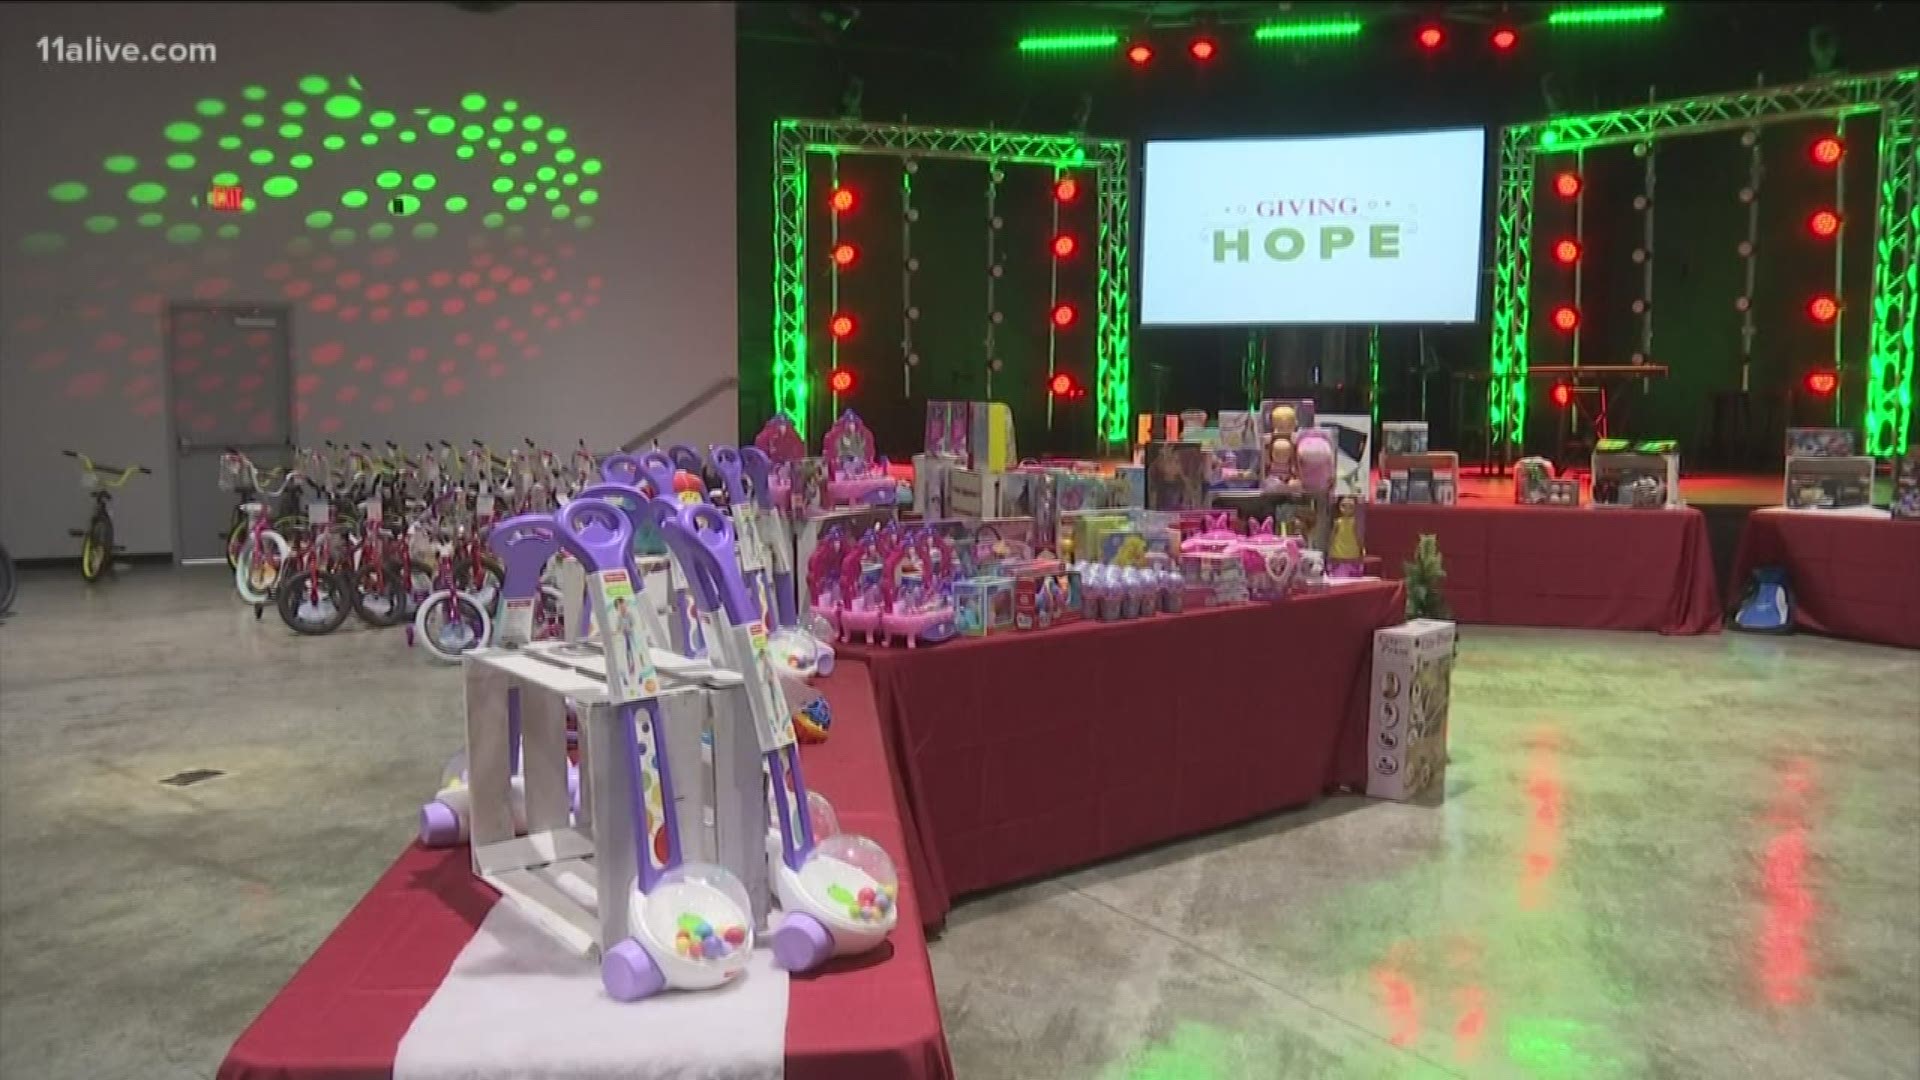 Turning Point Church in McDonough donated more than 500 toys and 200 bikes!